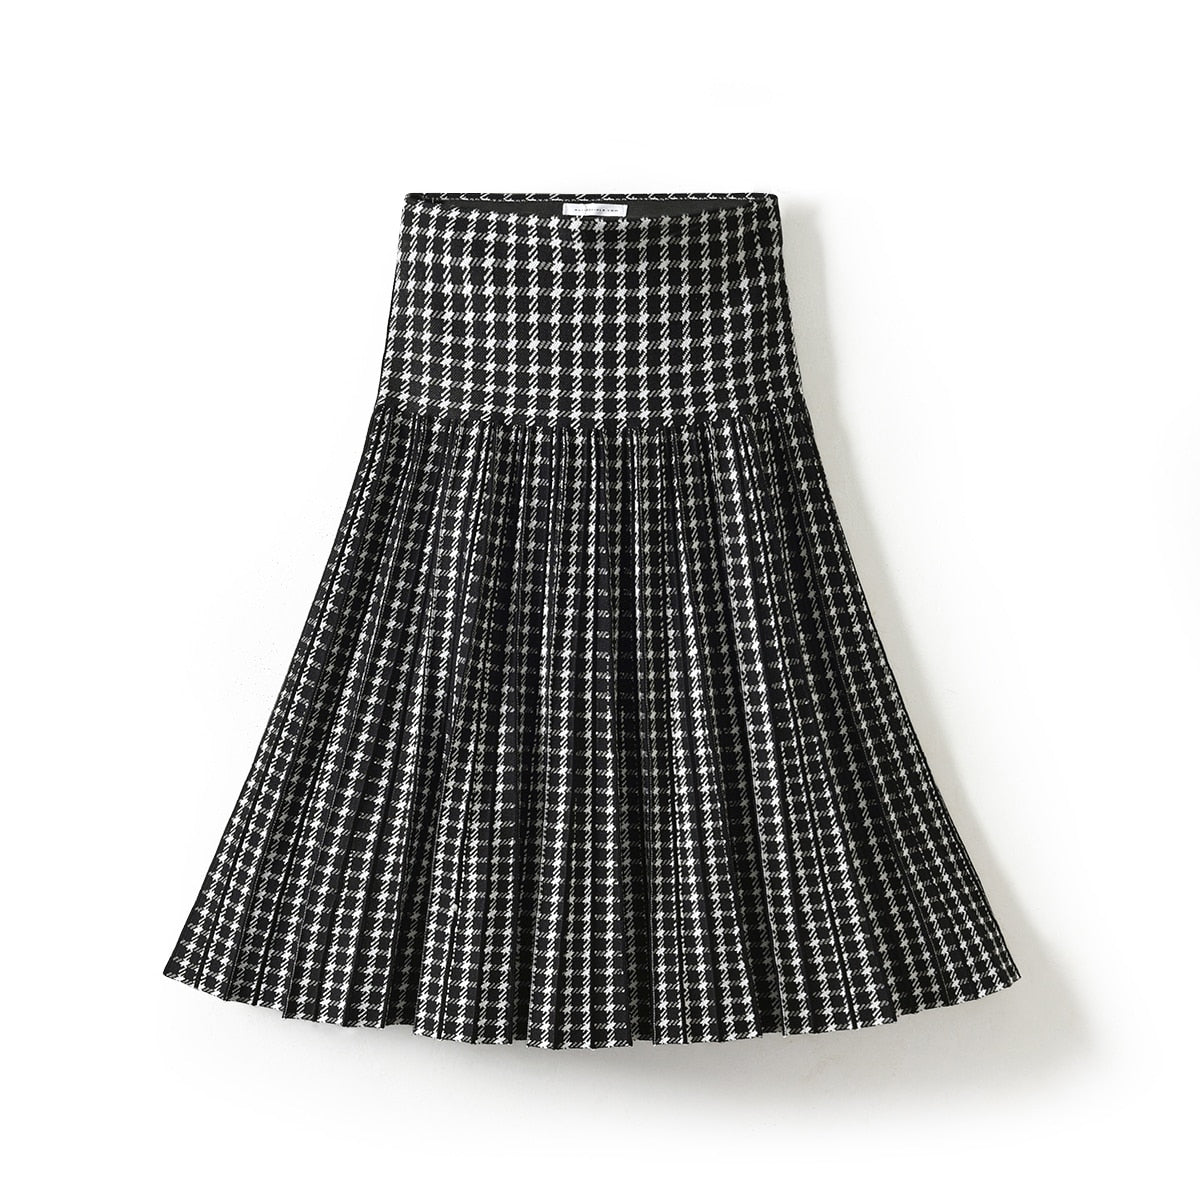 2022 Women Knitted Pleated Skirts Fashion High Waist Knit Dress Solid Color Female Classic Skirt 0 DailyAlertDeals black plaid XS 